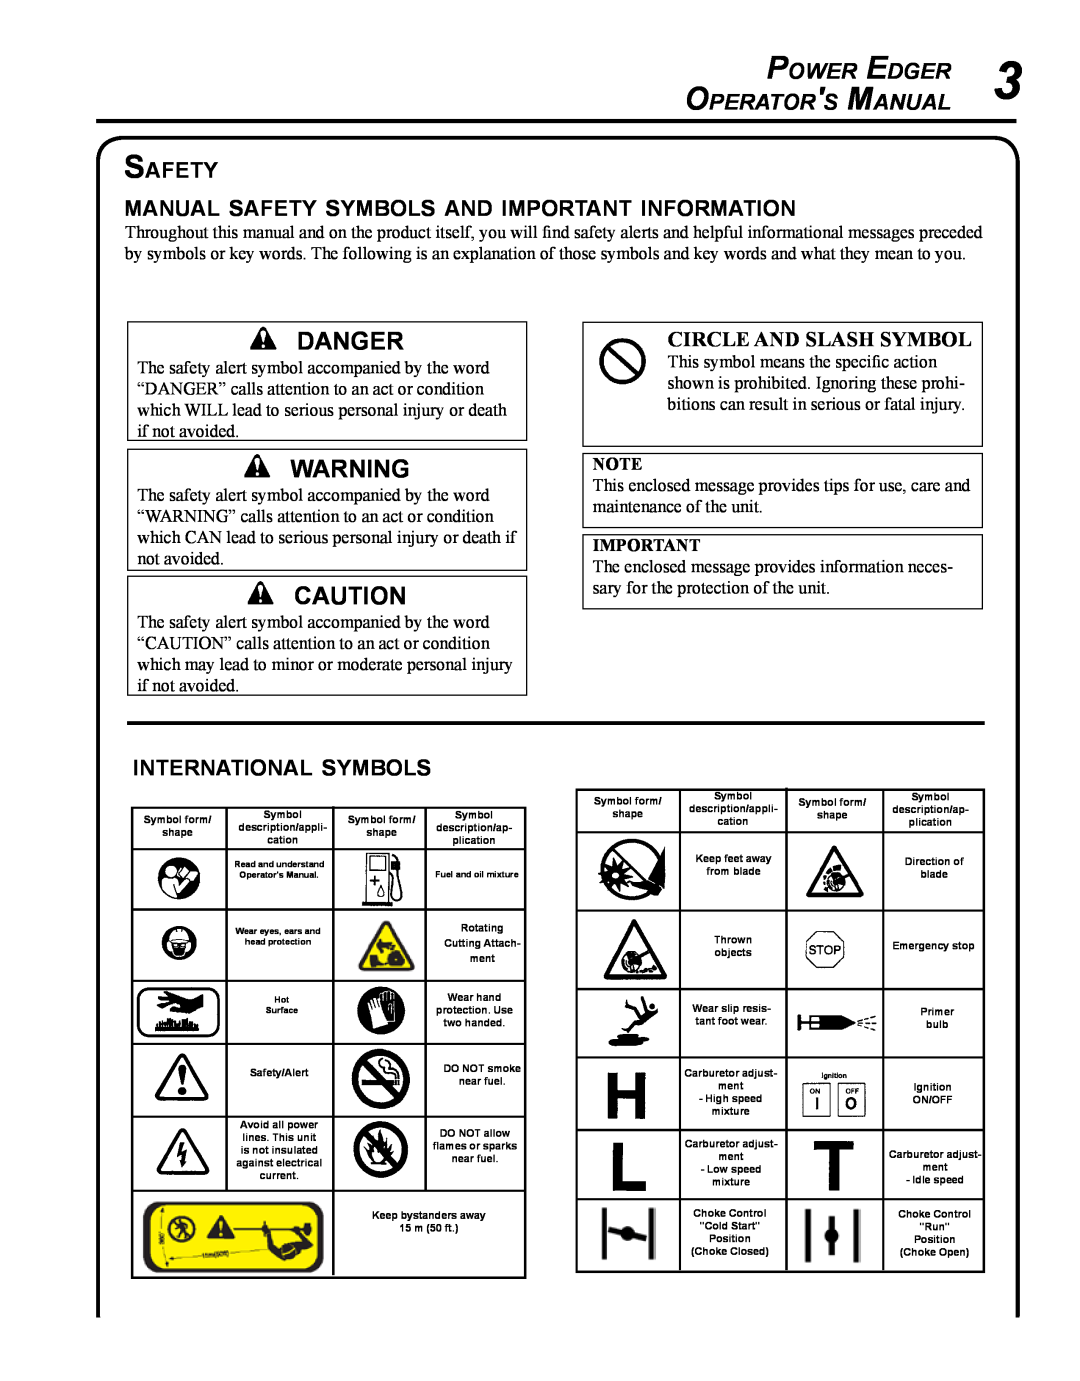 Echo PE-230 Danger, Power Edger, Operators Manual, Safety manual safety symbols and important information 